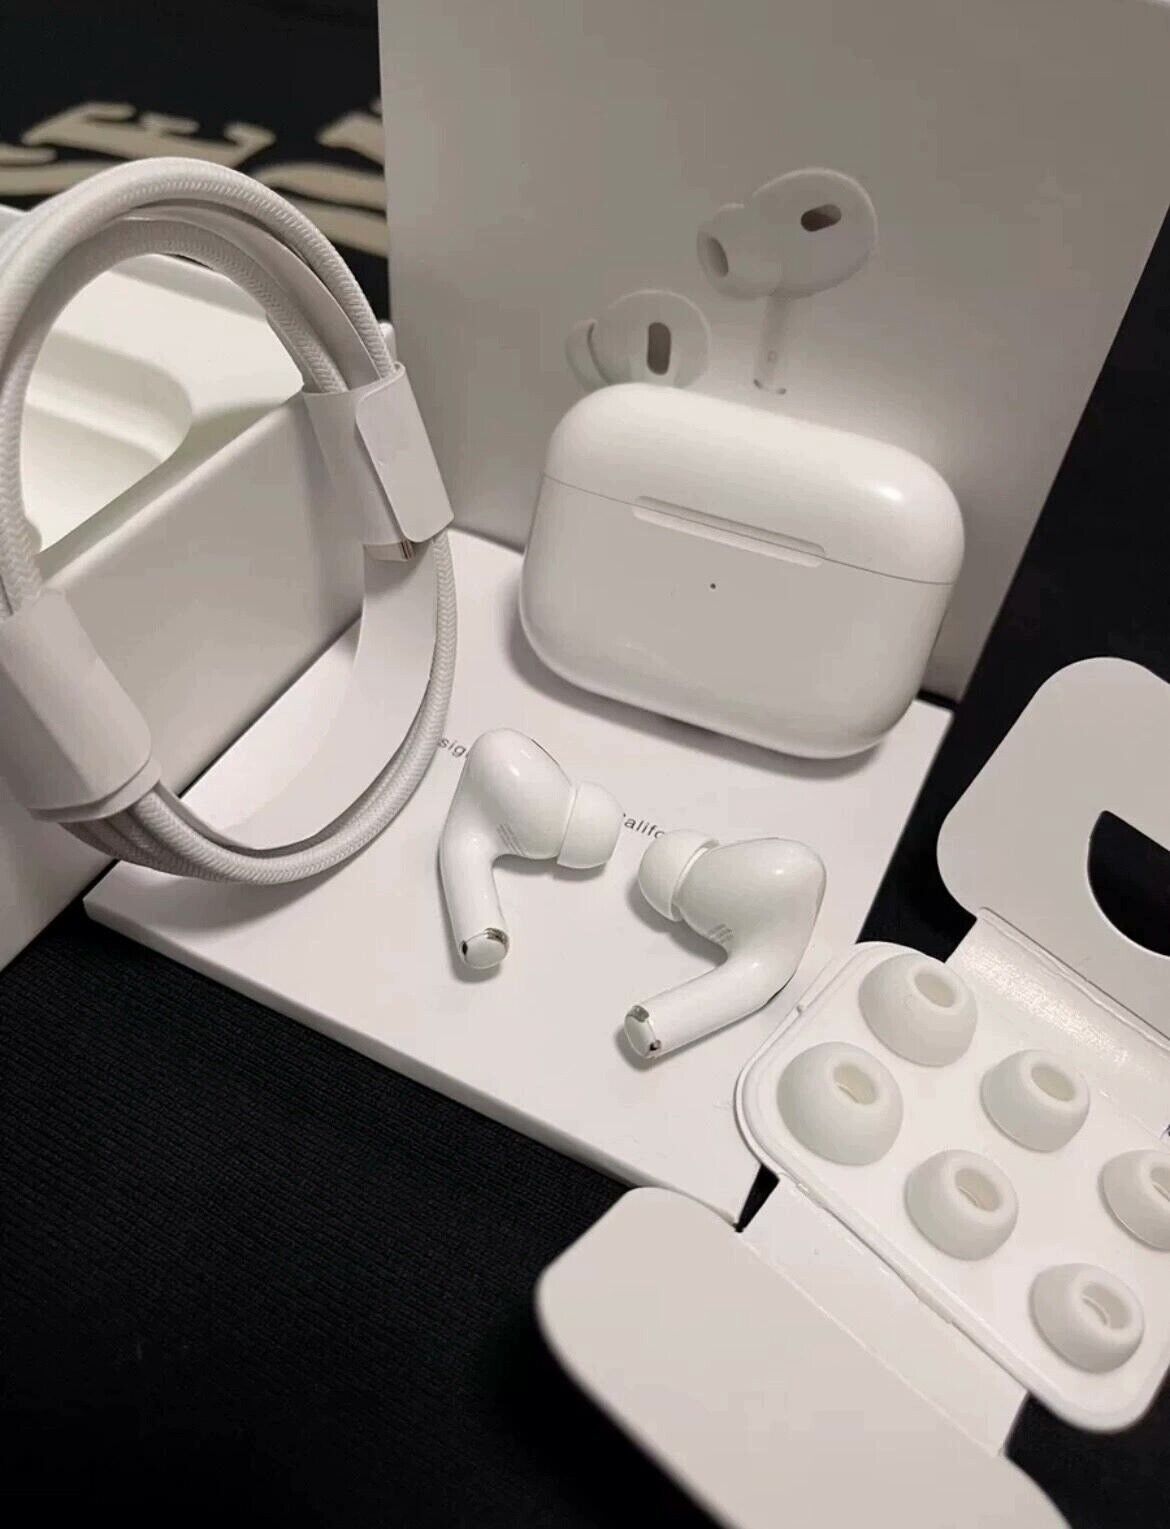 Apple AirPods Pro 2nd Wireless Bluetooth Earbuds & MagSafe Charging Case US ship